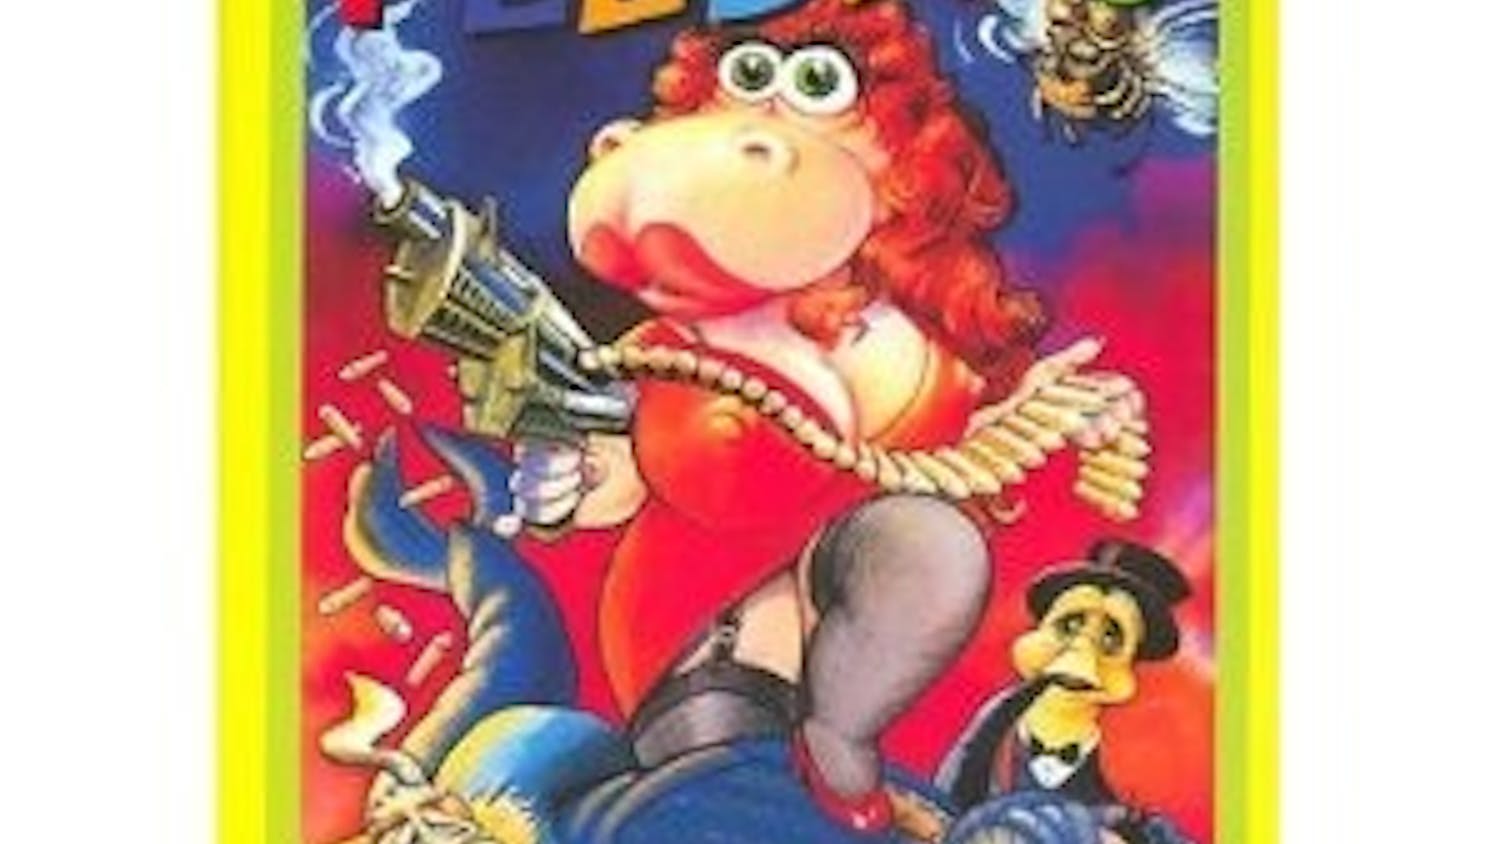 	‘Meet the Feebles’ offers a look at bad romance in a funny light. 